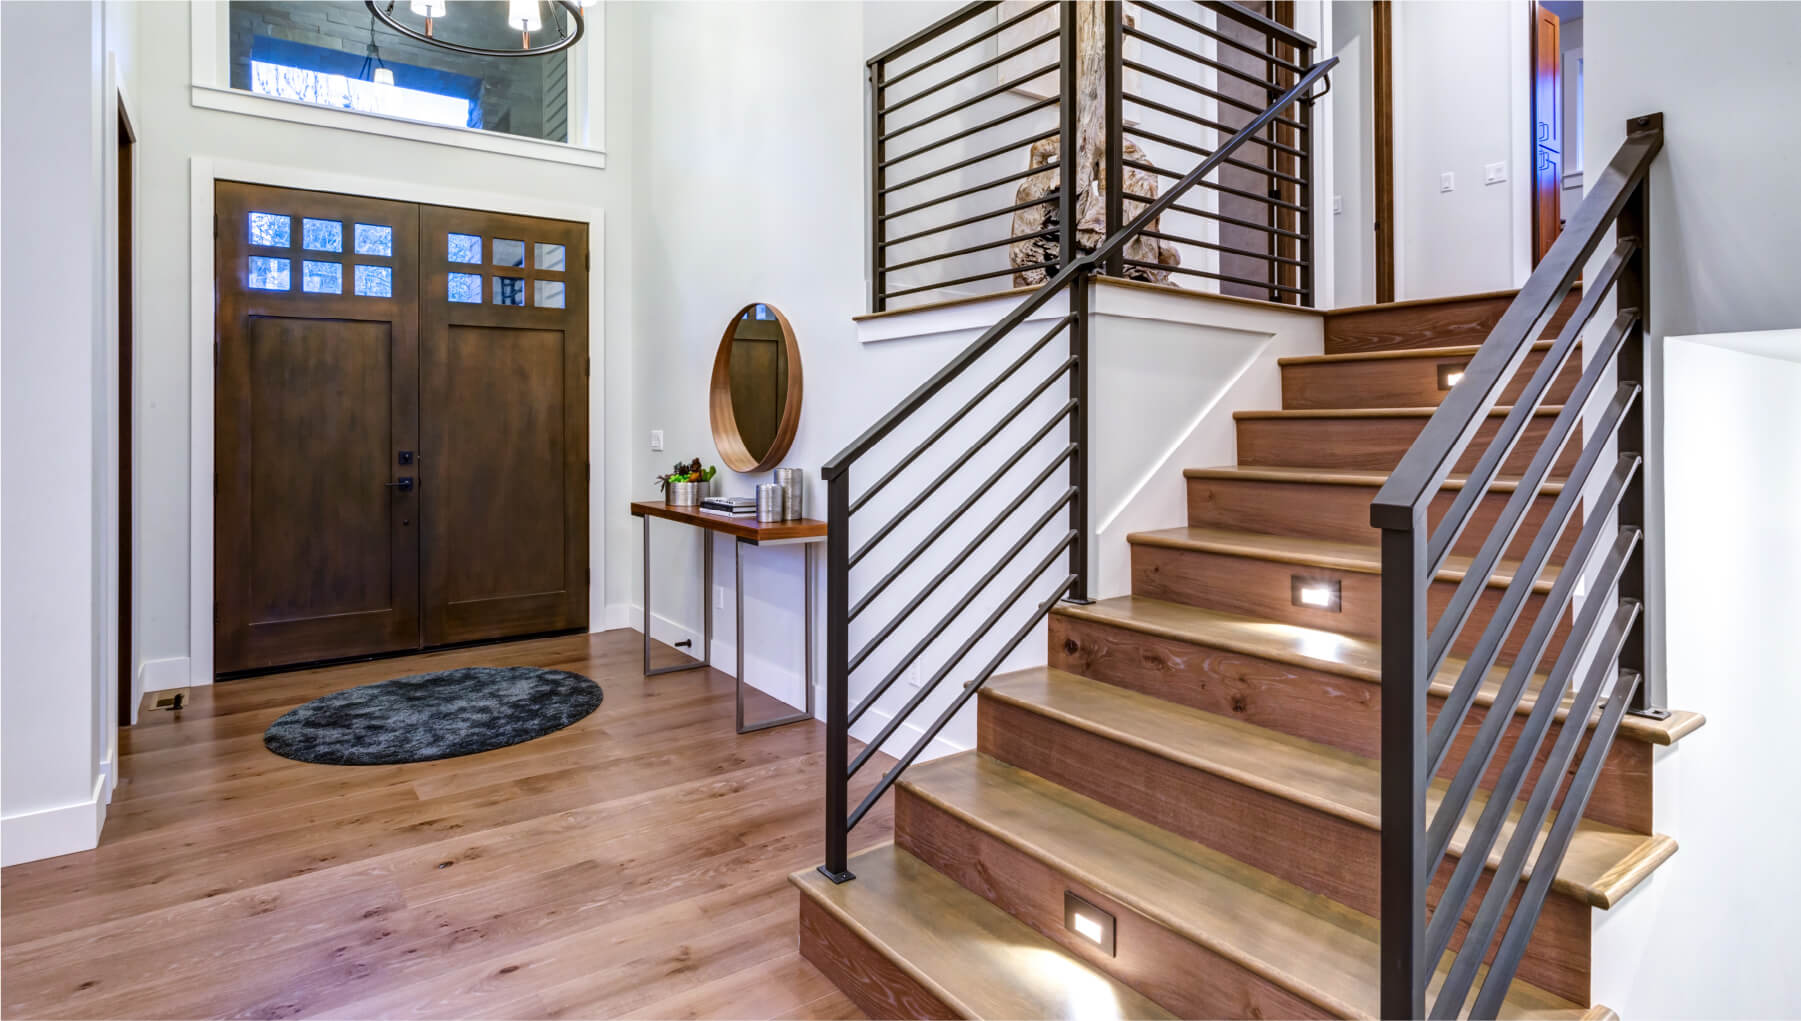 Carpet Buying 101 – Choosing the Best Carpeting for Your Stairs